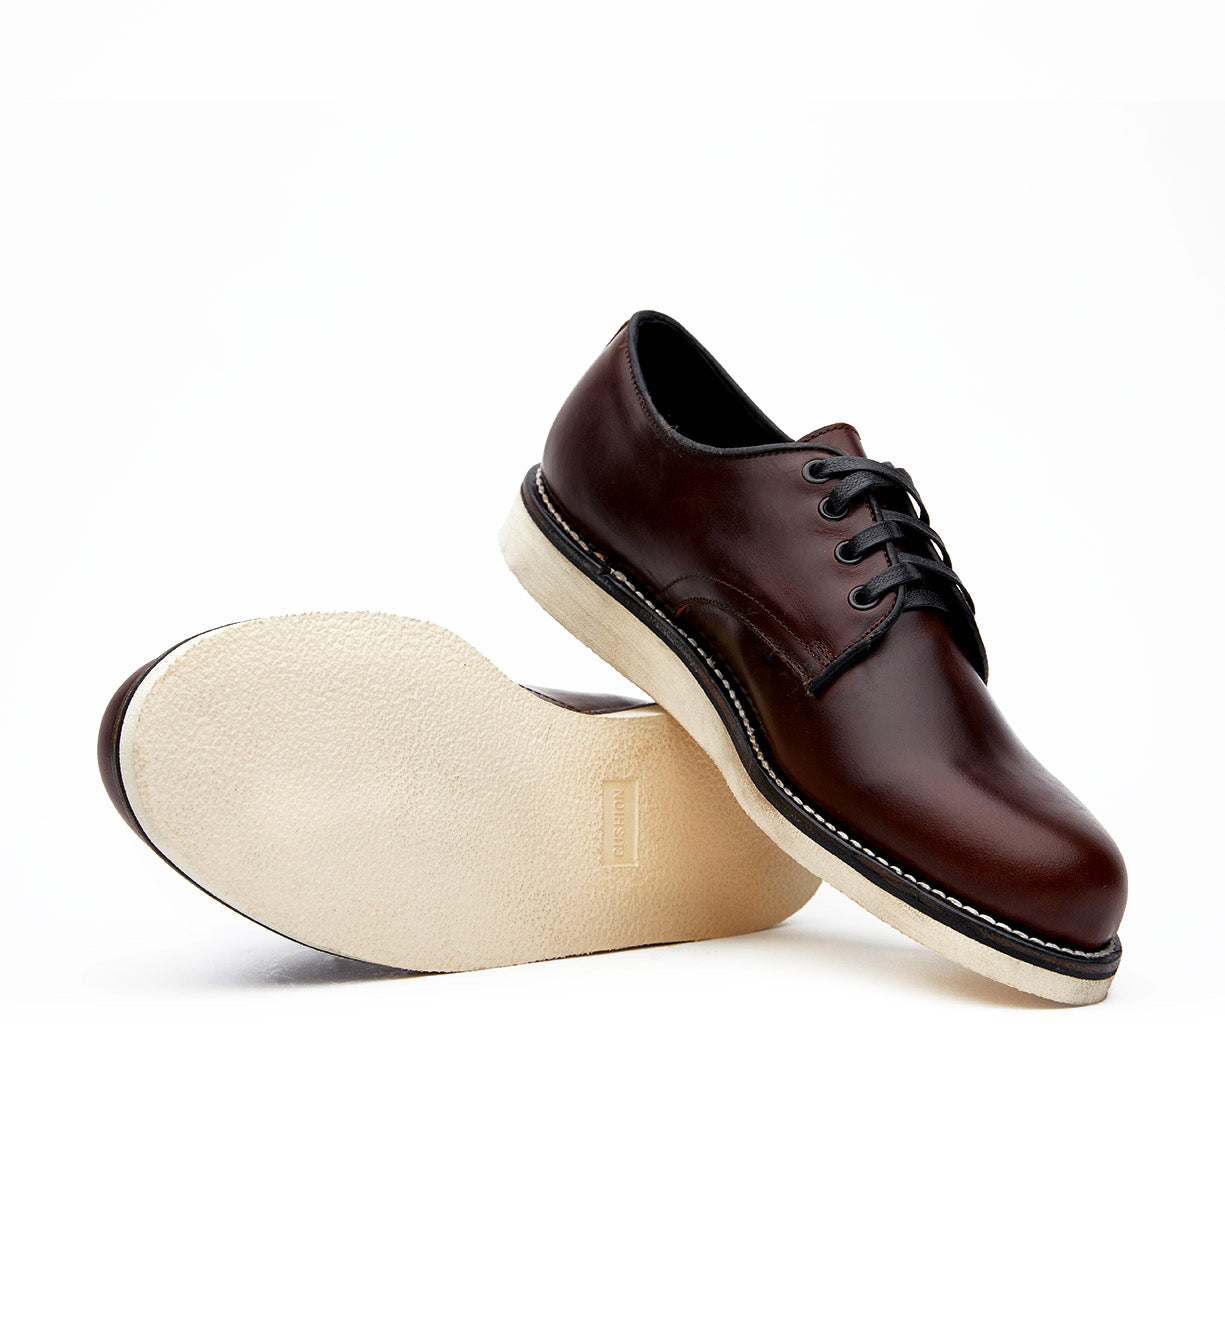 A comfortable pair of Broken Homme Michael II brown derby shoes with an oxford silhouette and Vibram wedge outsole on a white background.